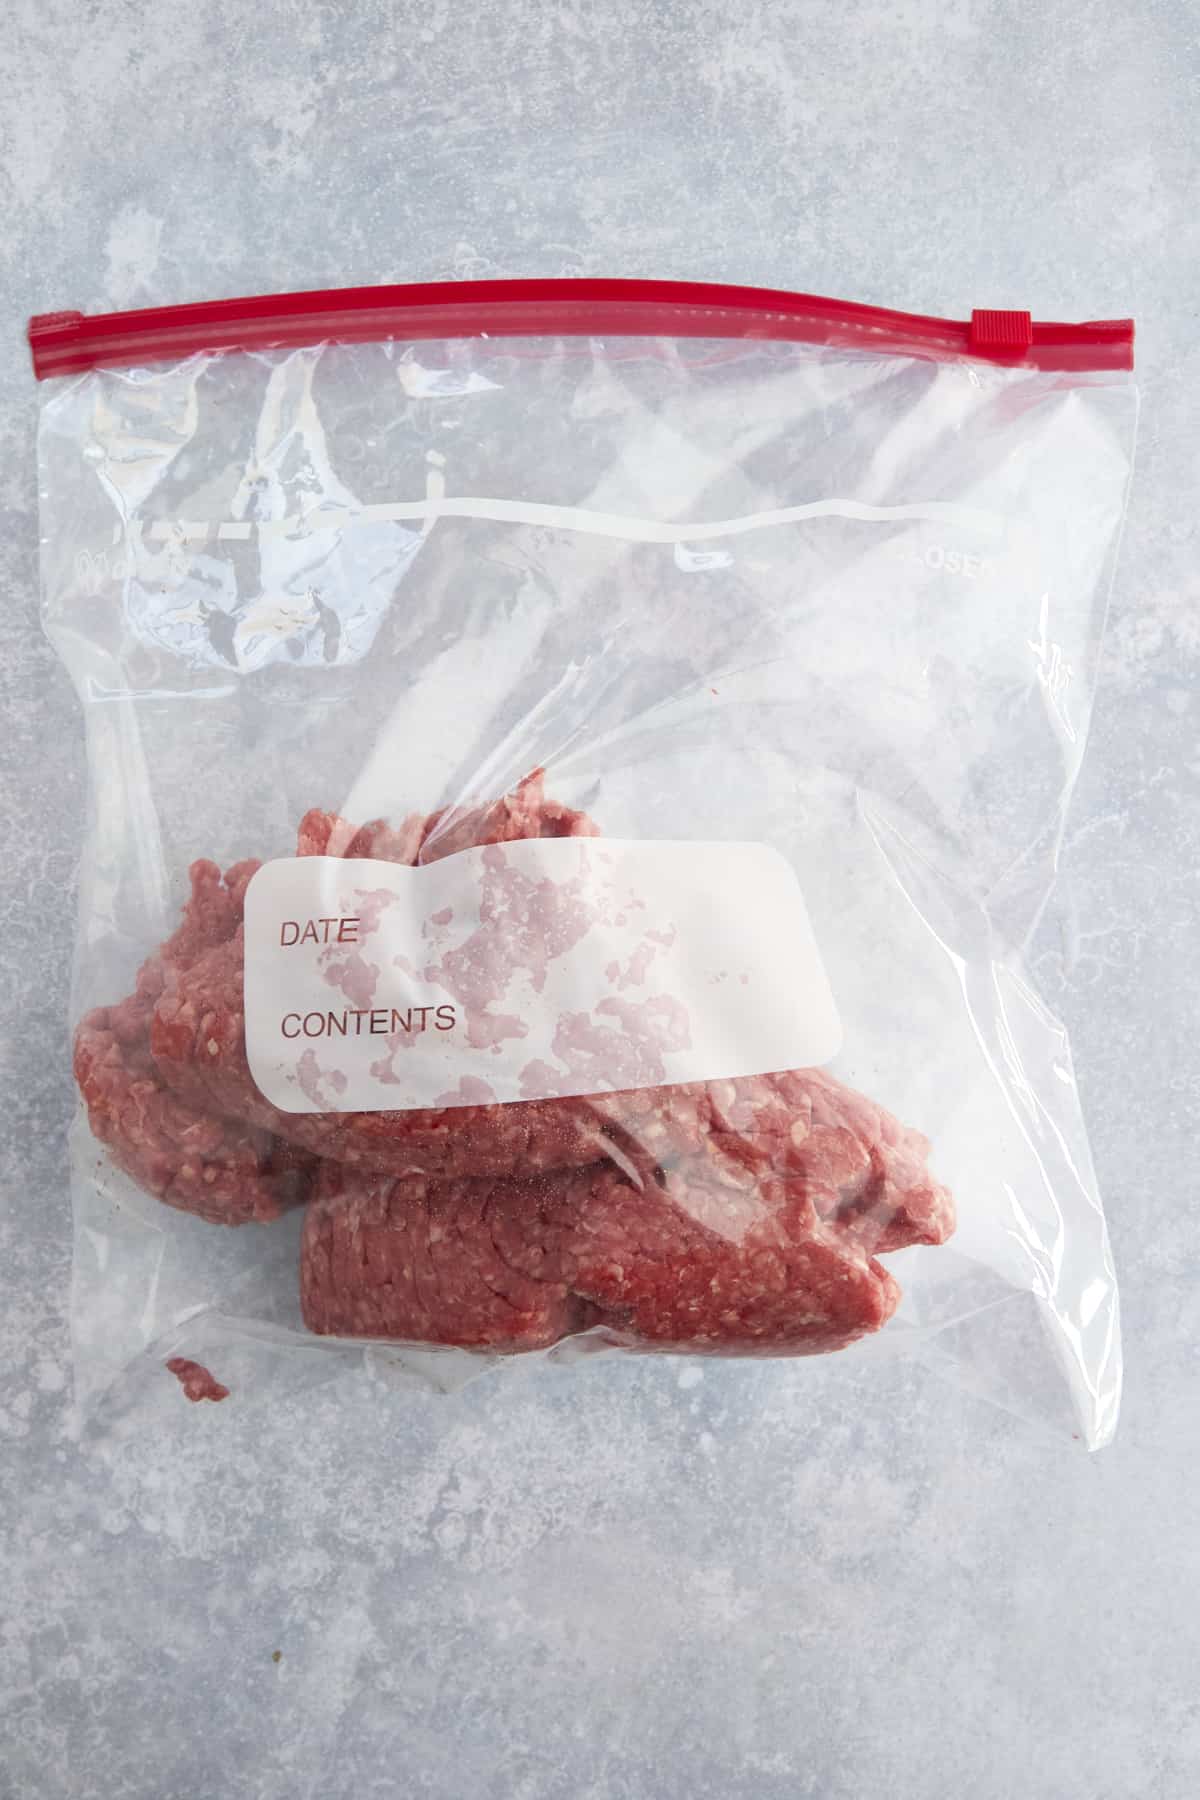 1 pound of raw ground beef in a sealable bag. 